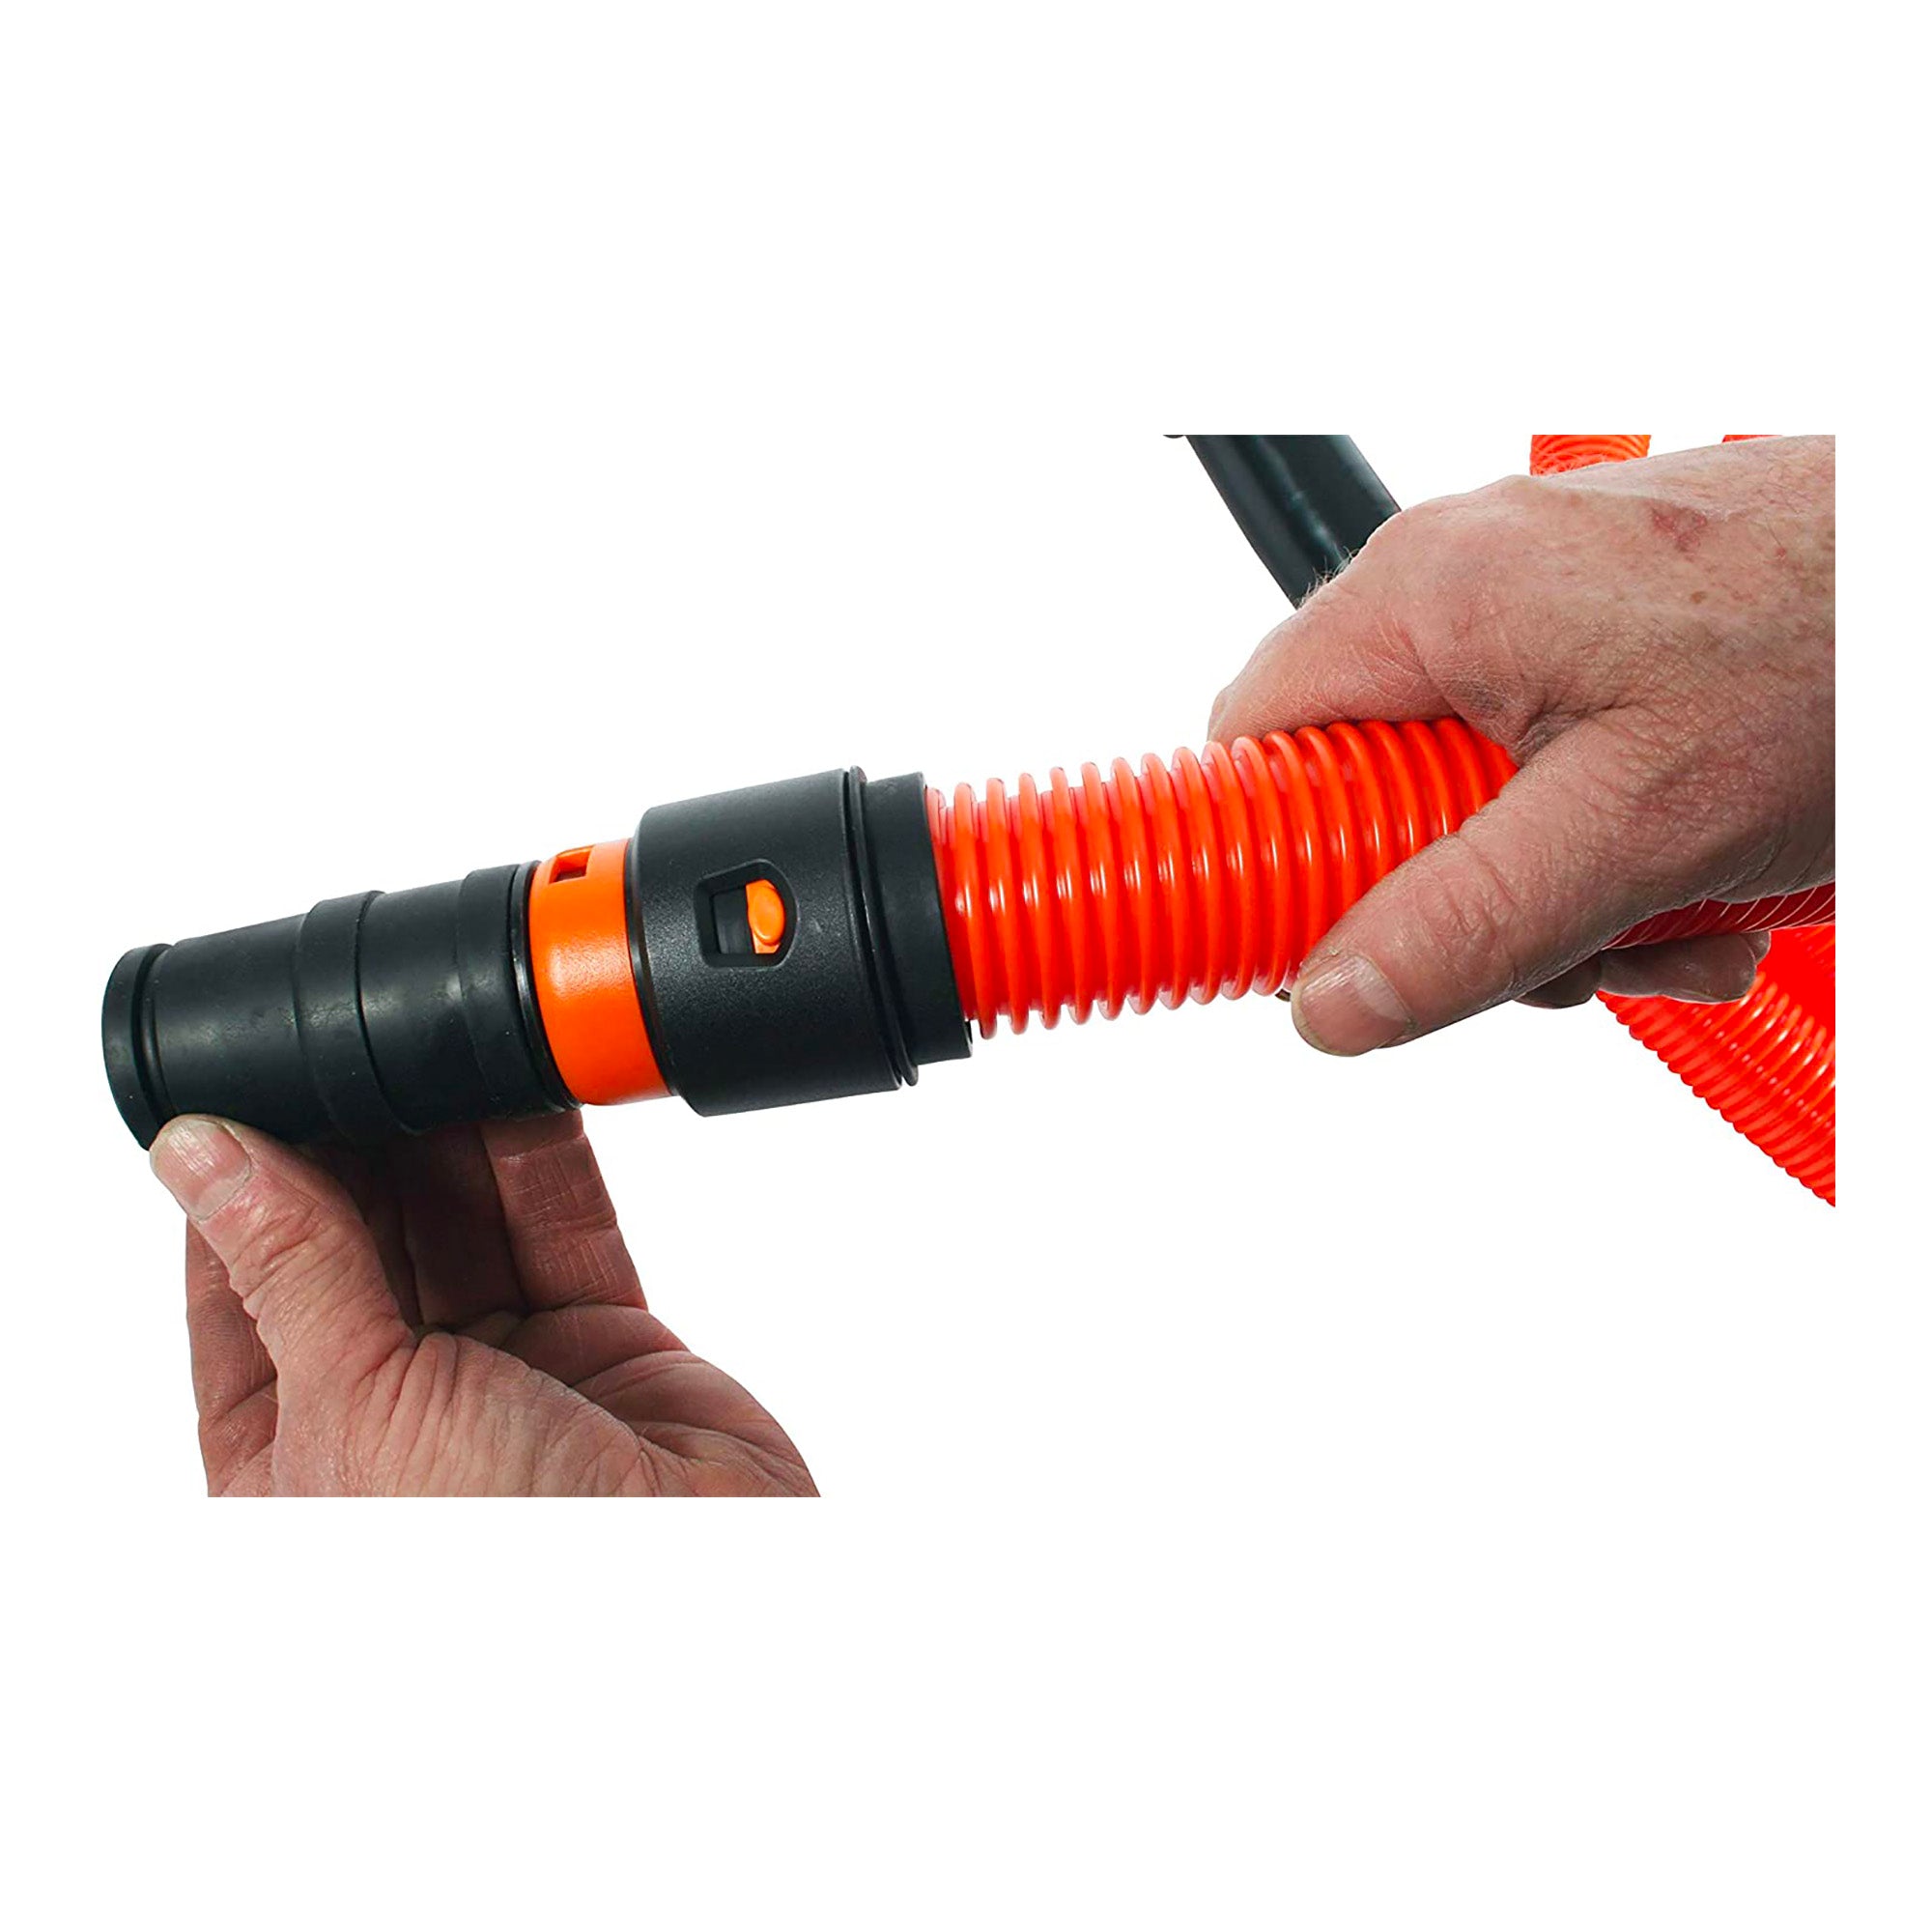 Dust Collection Hoses for Shop Vacuums - Nozzle head